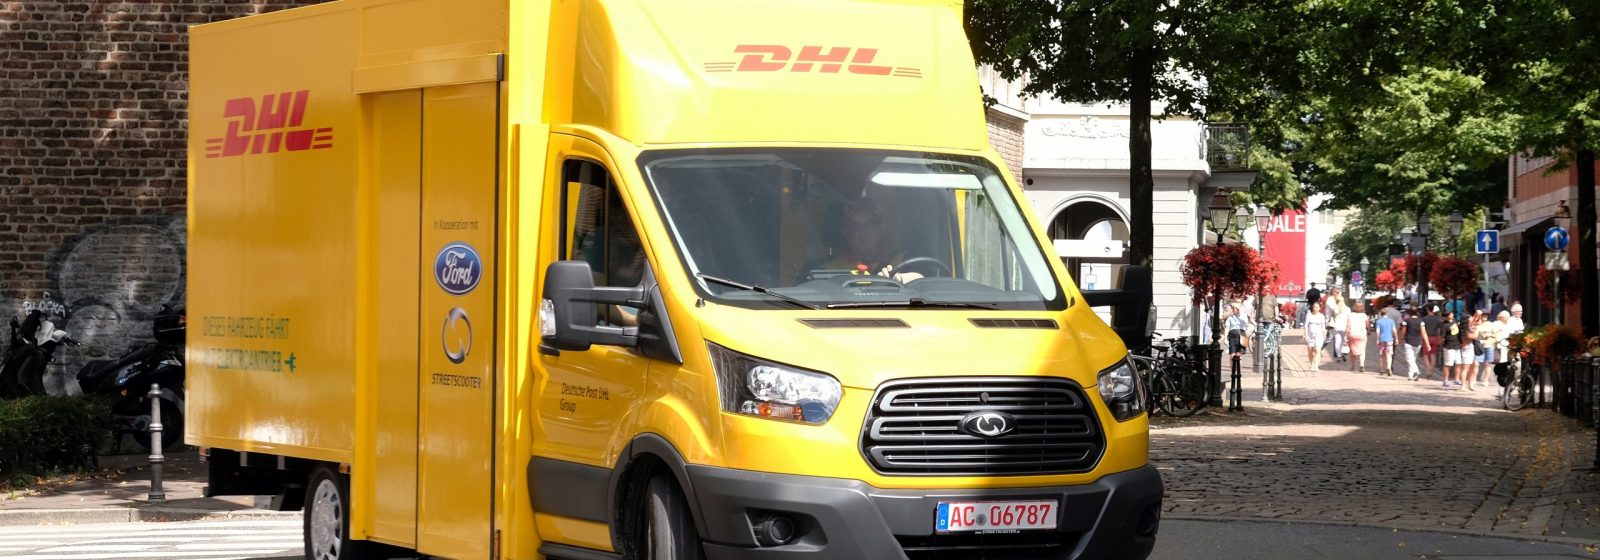 DHL streetscooter